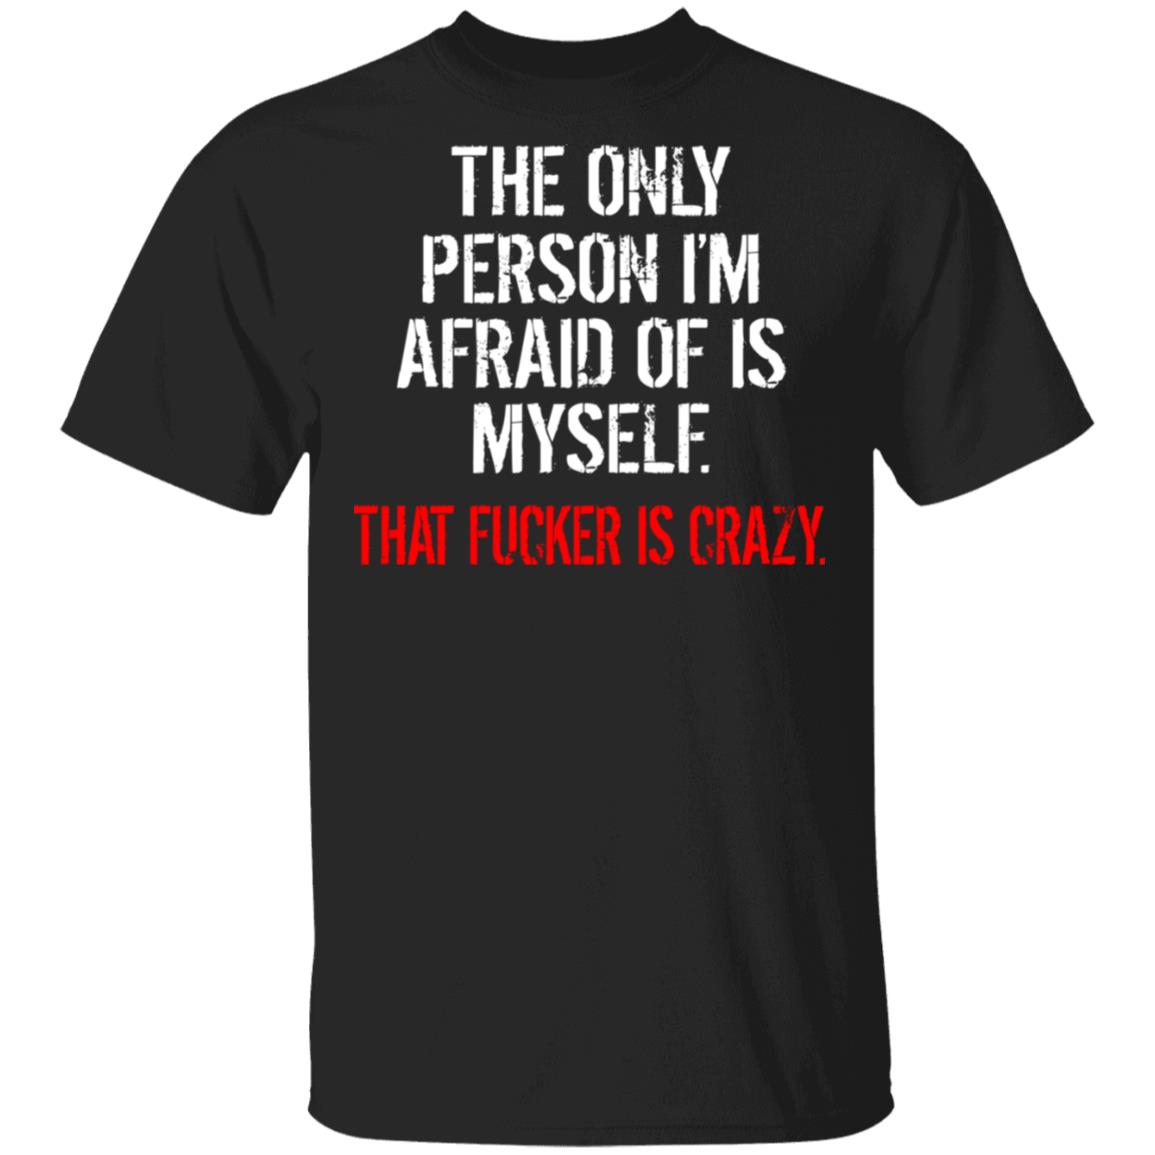 The Only Person I'm Afraid Of Is Myself Shirt | Teemoonley.com